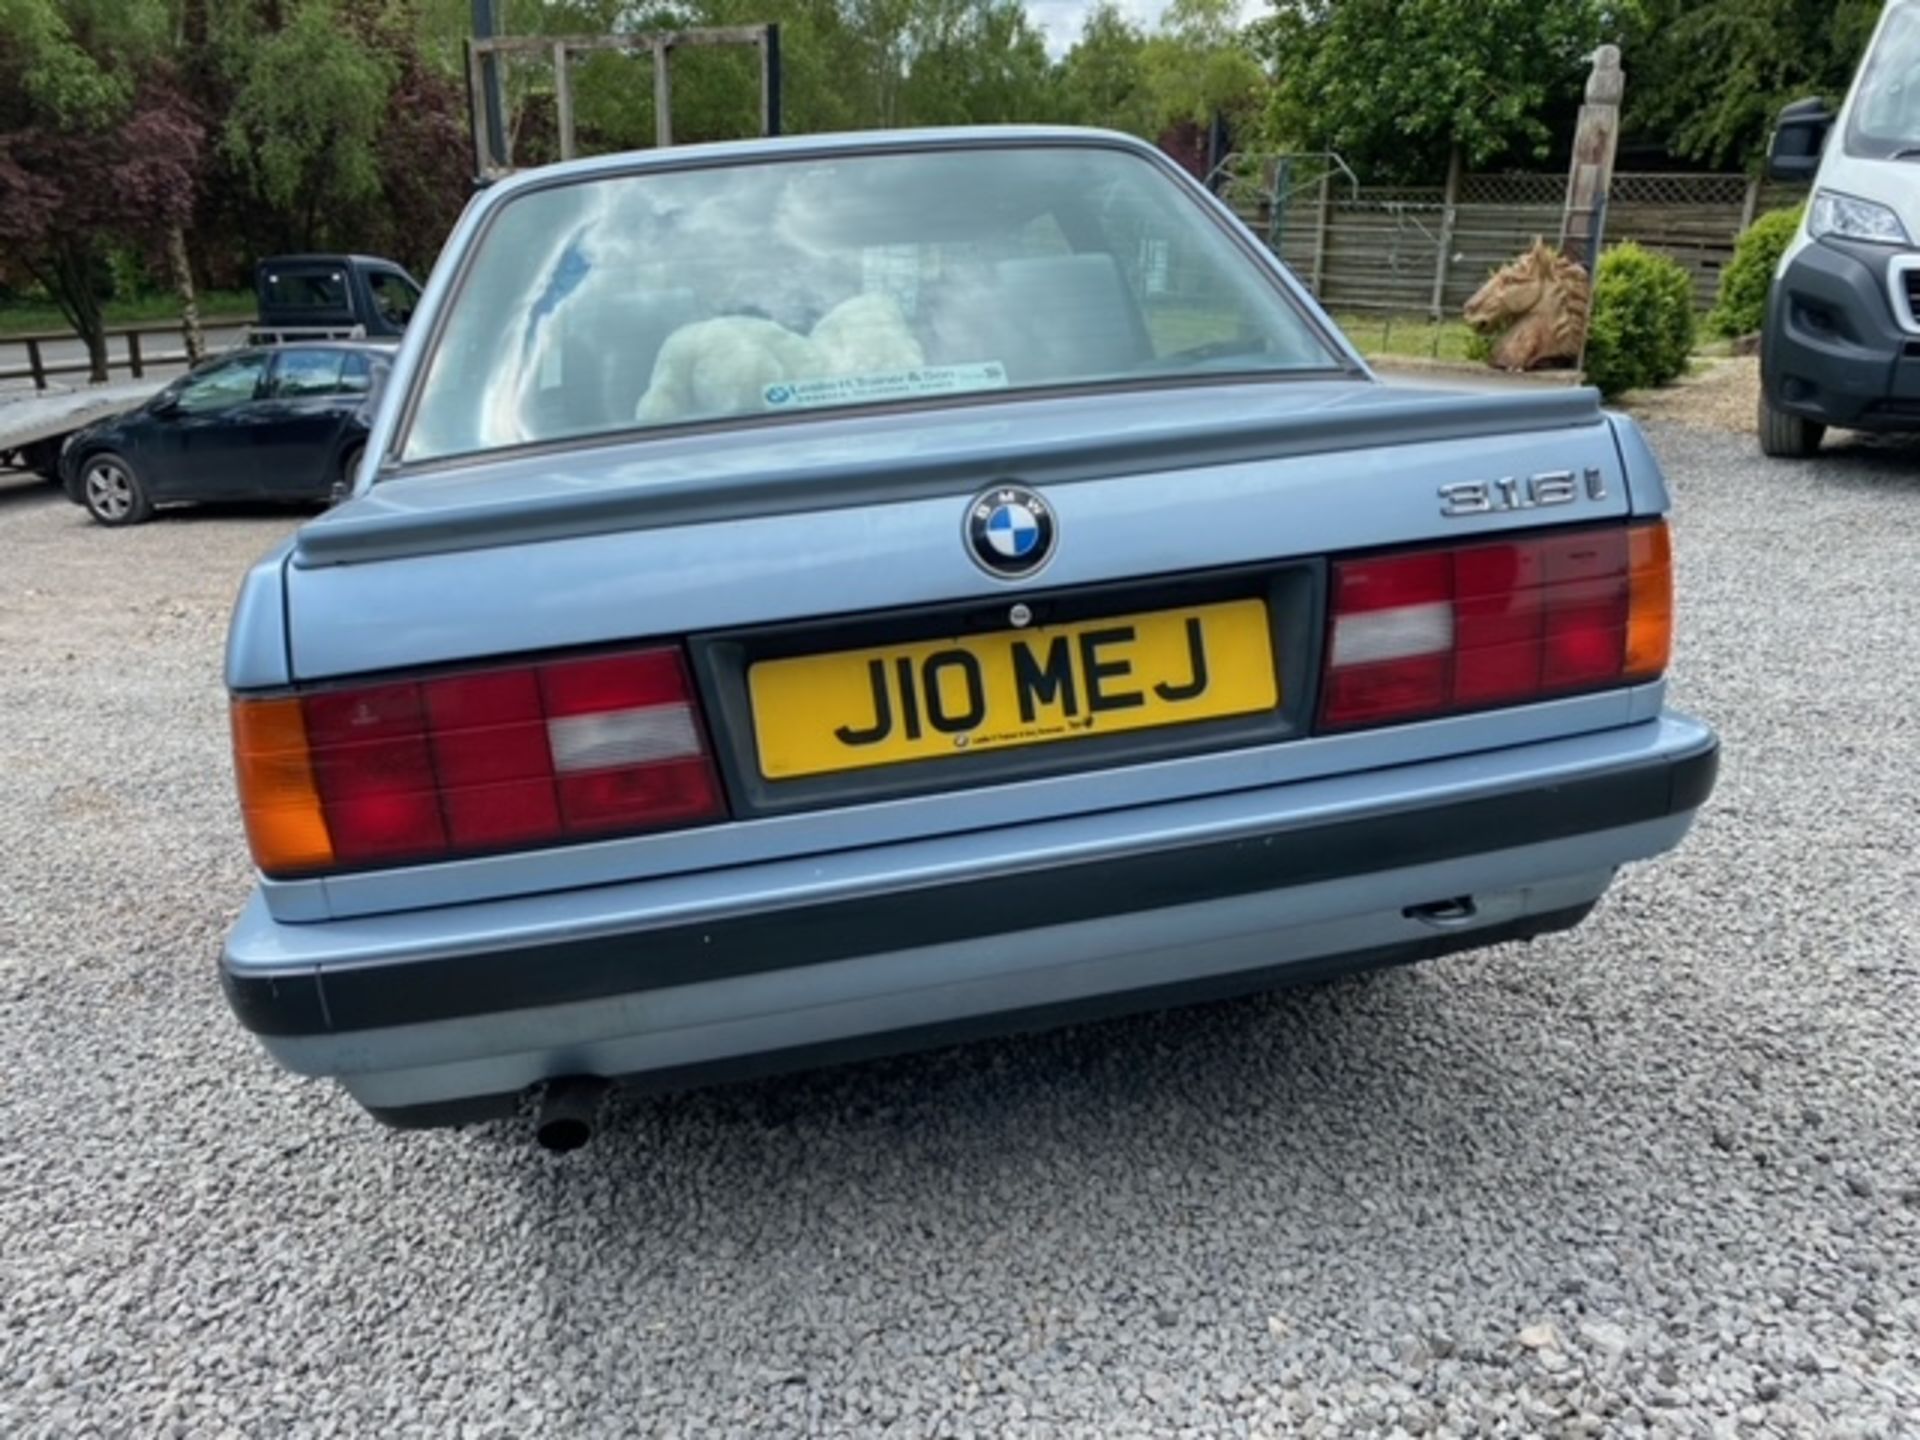 1991 BMW 316i 1600CC 4DR SALOON - WITH PRIVATE PLATE J10MEJ - Image 5 of 22